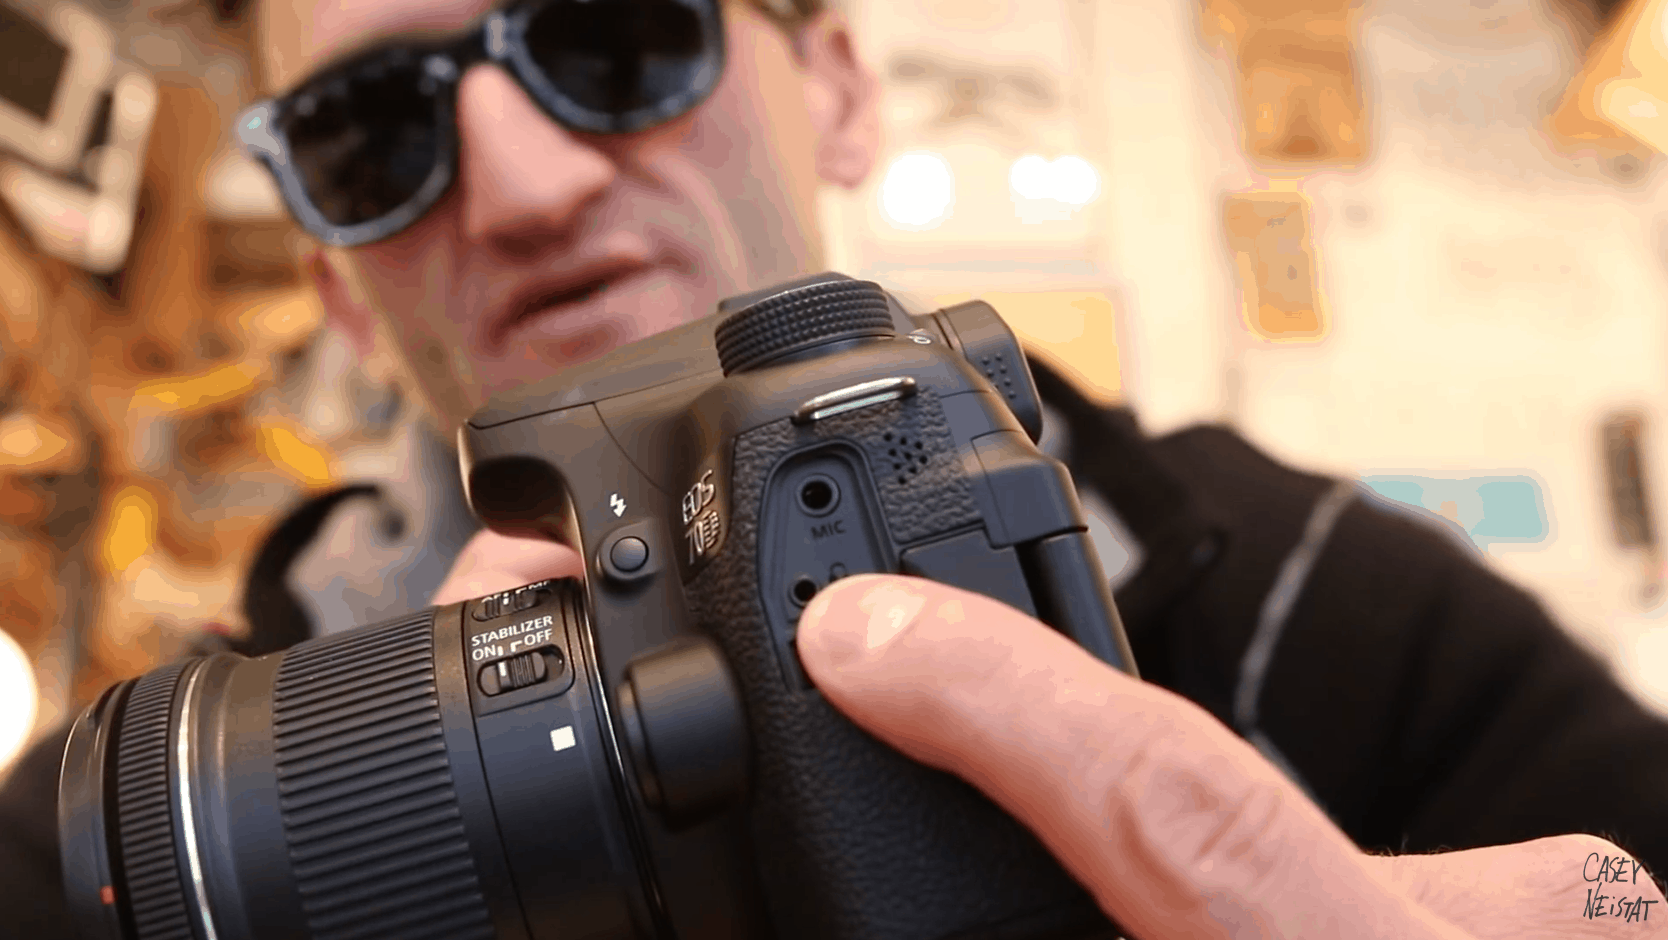 What Of the Camera Does YouTuber Casey Neistat Use?